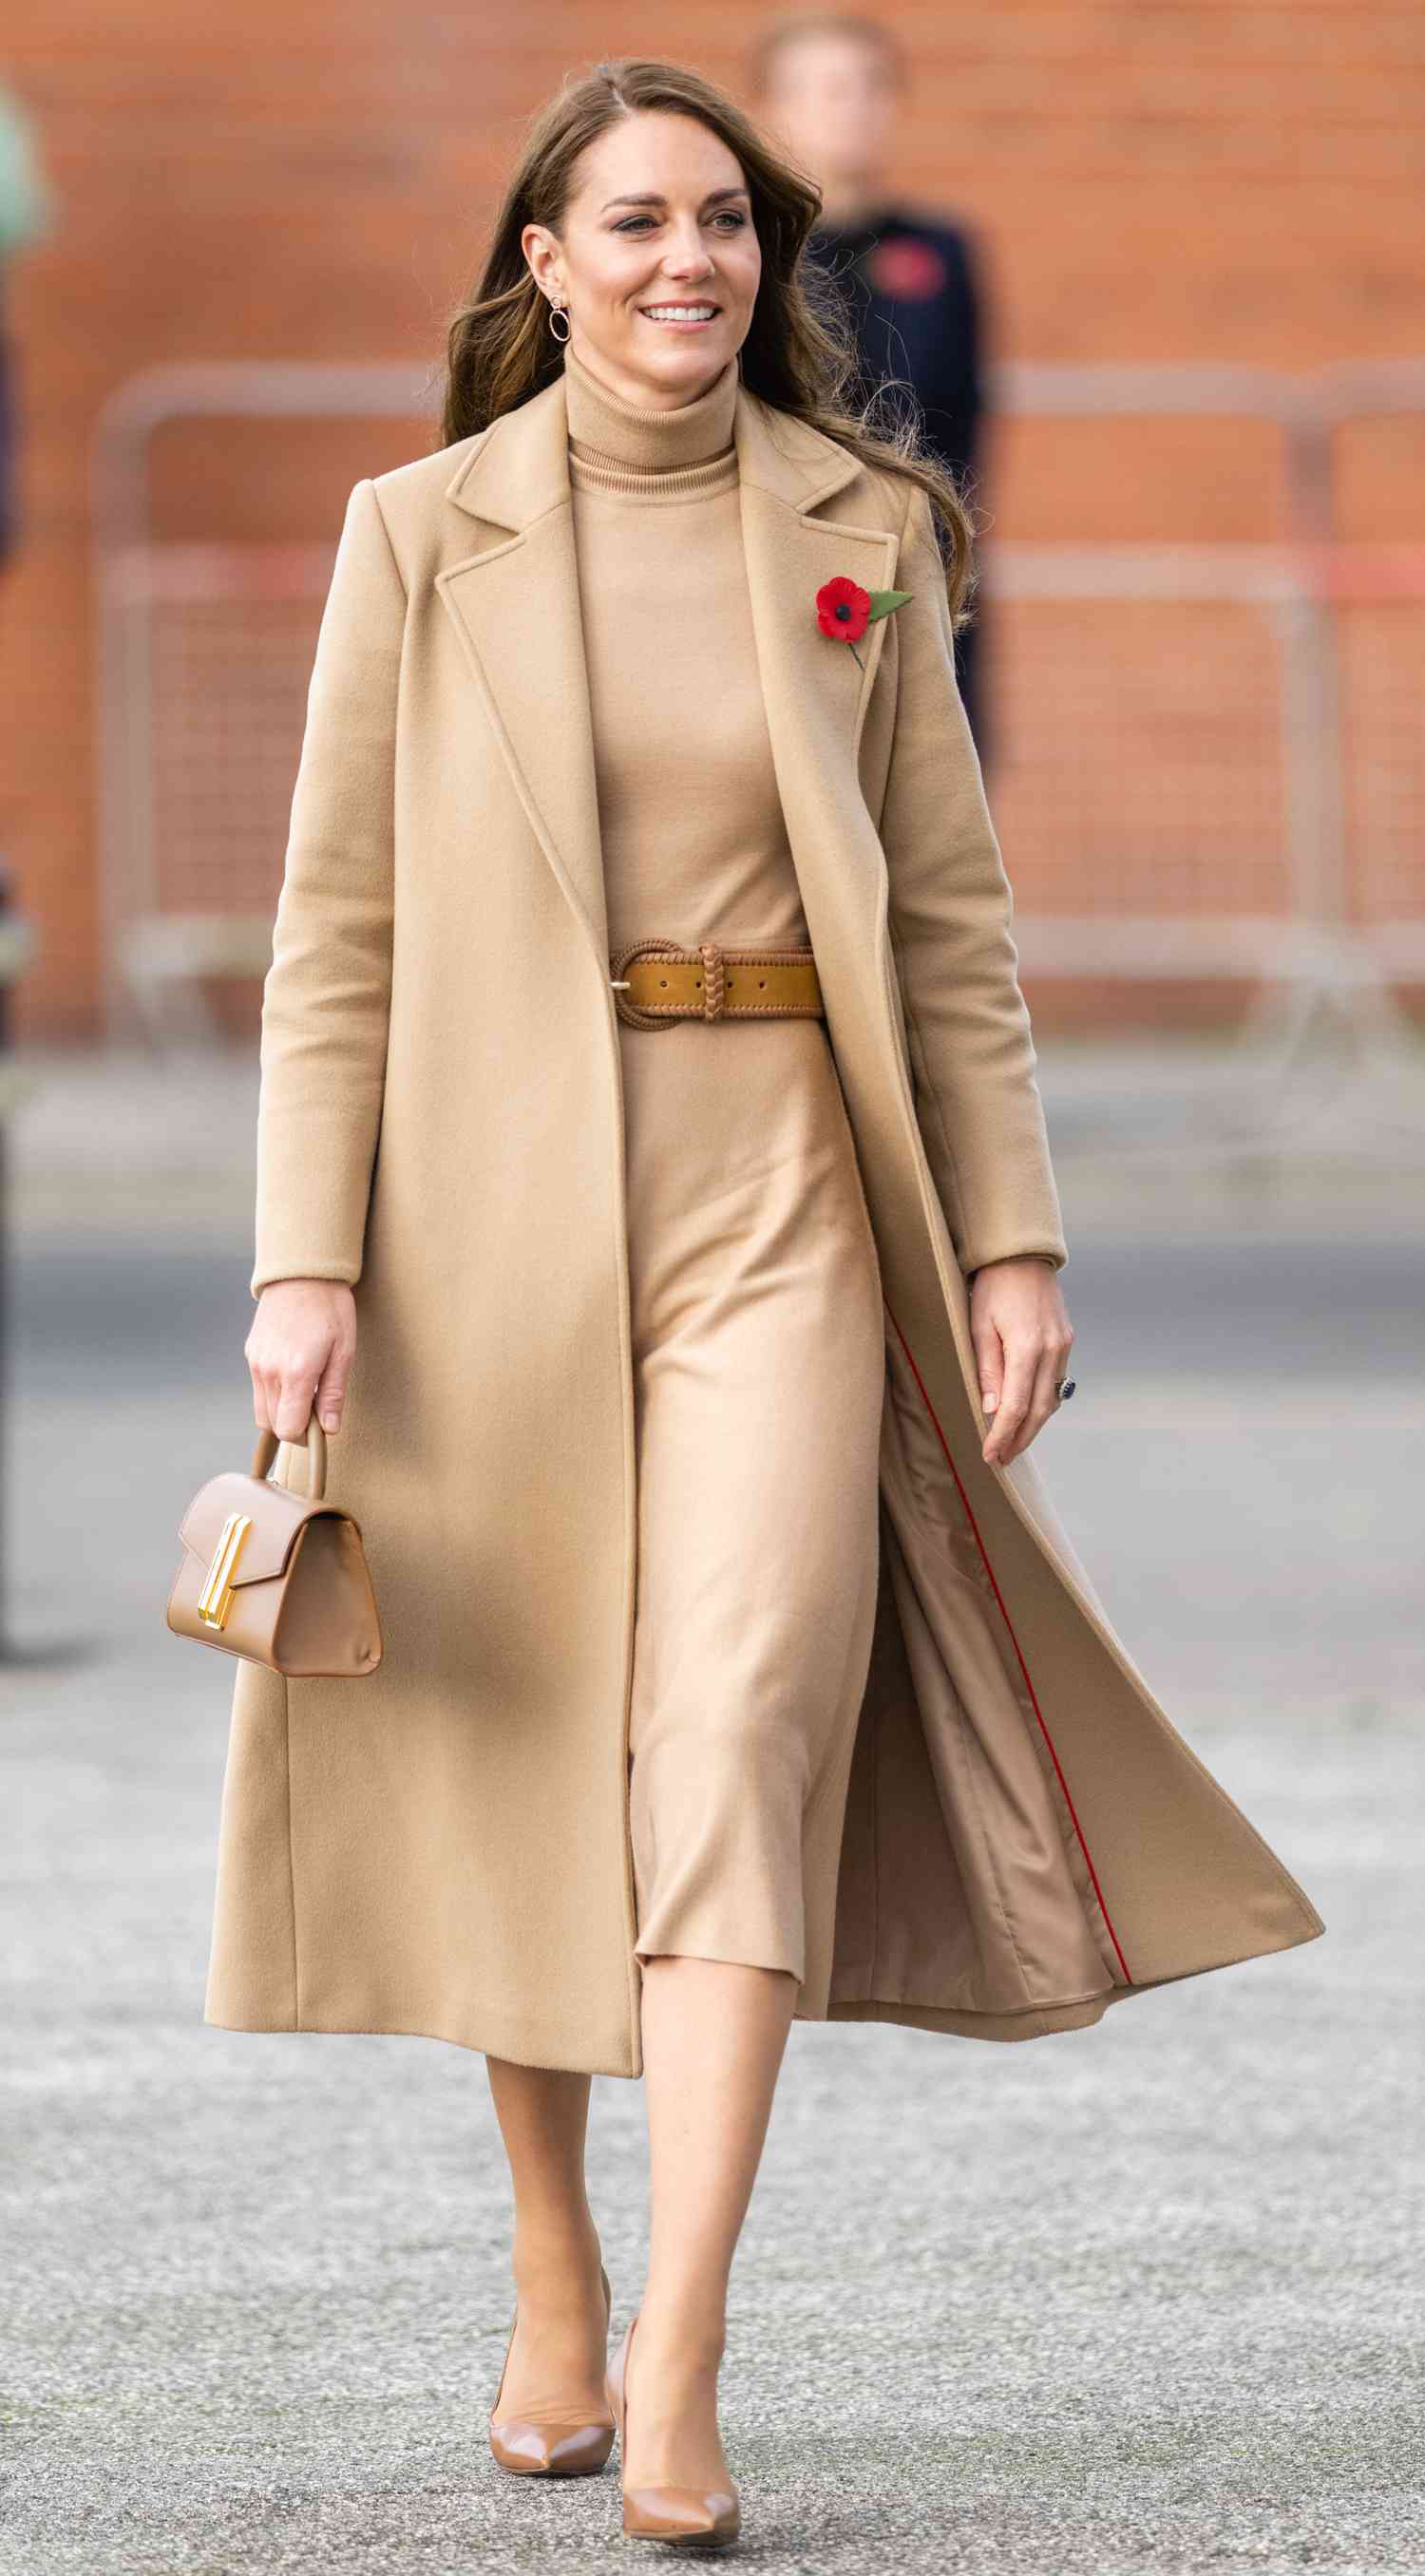 Kate Middleton in a monochromatic camel overcoat and belted sweater dress